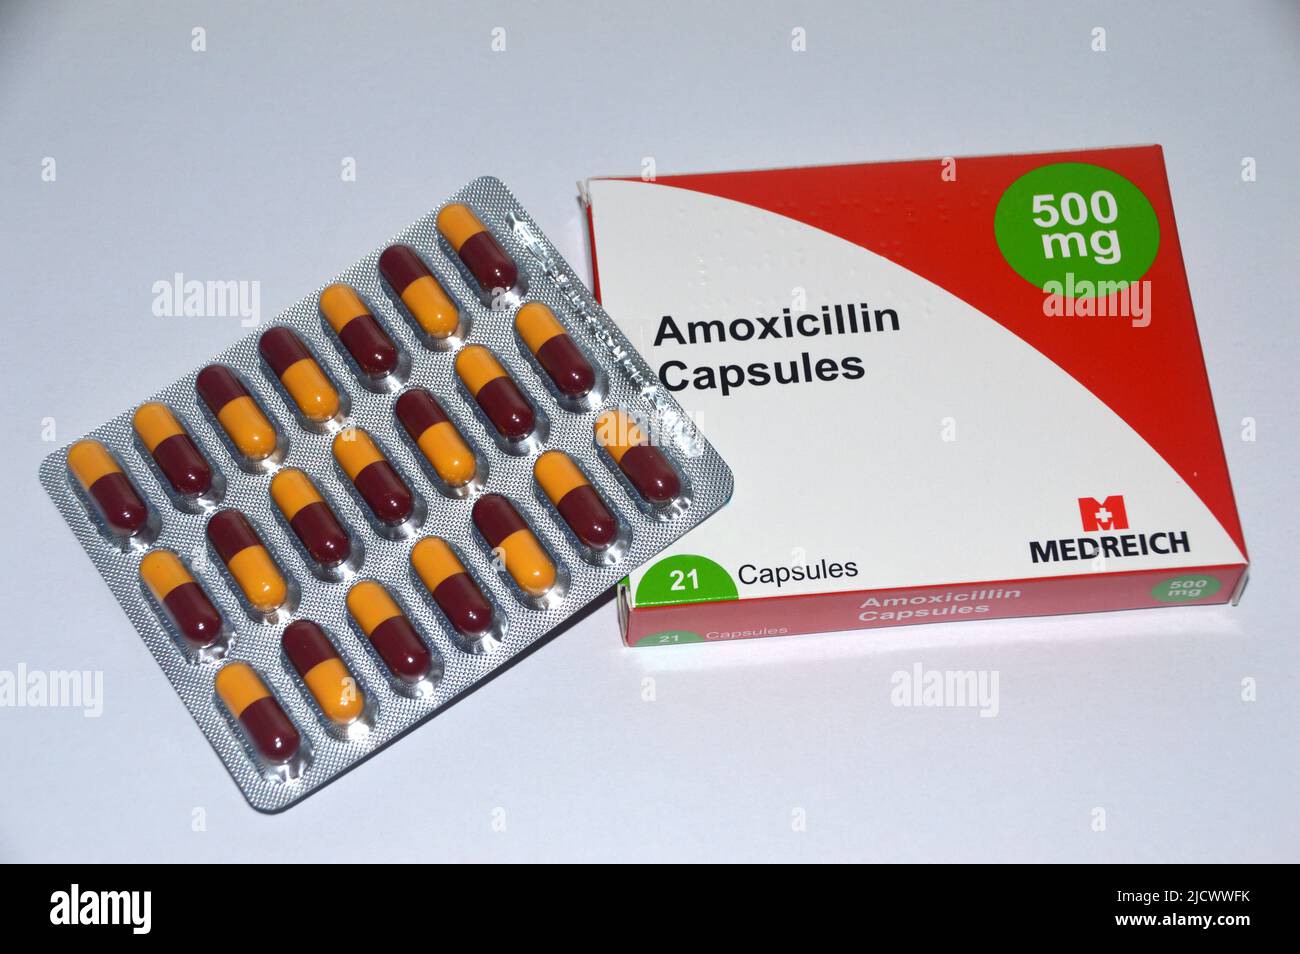 A Box of 21, Yellow & Burgundy 500mg  Penicillin/Antibiotic Amoxicillin Capsules made by Medreich Prescribed for an Bacterial Infection, England, UK. Stock Photo